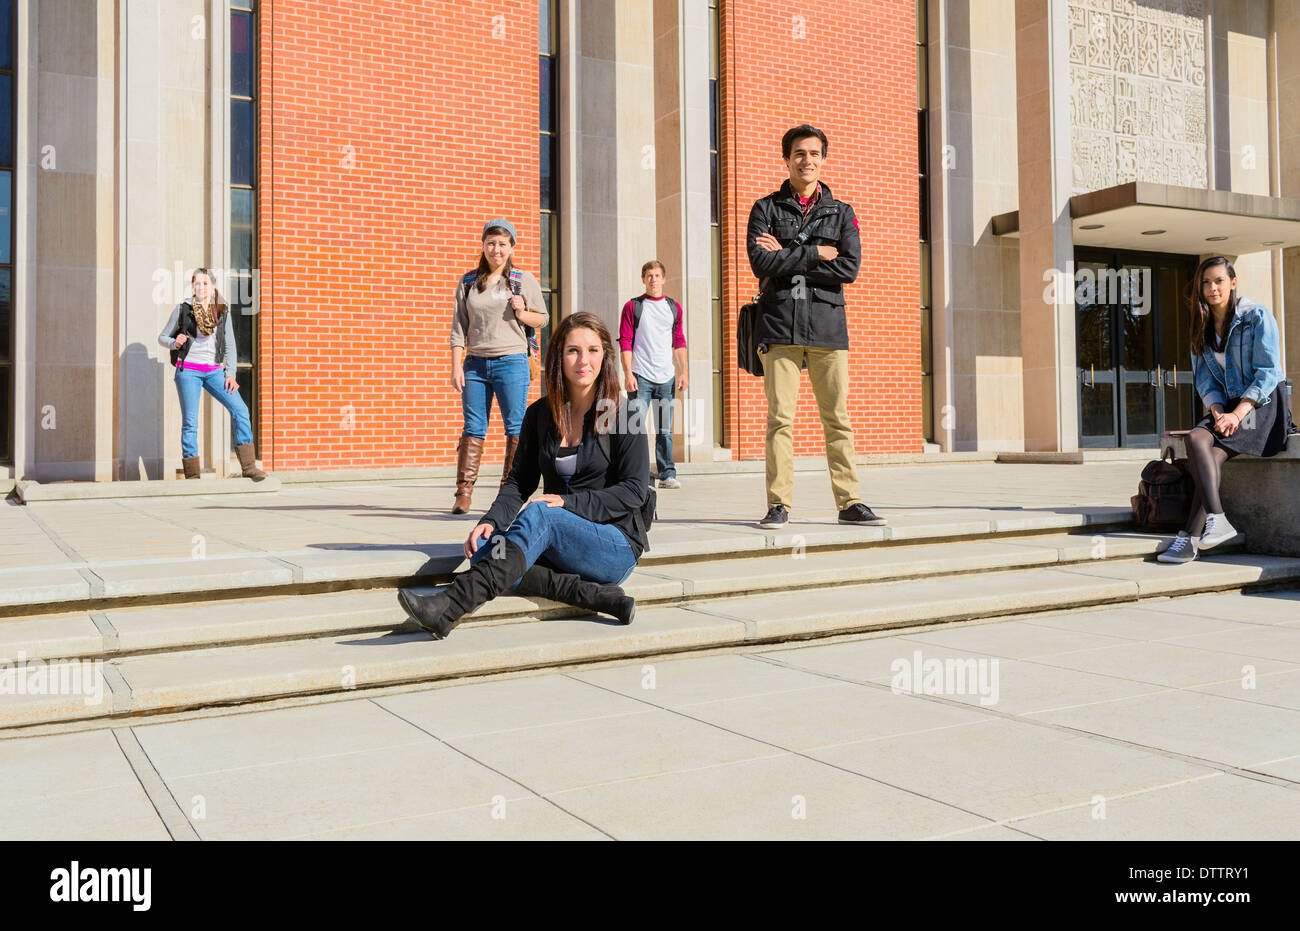 Students on campus steps Stock Photo